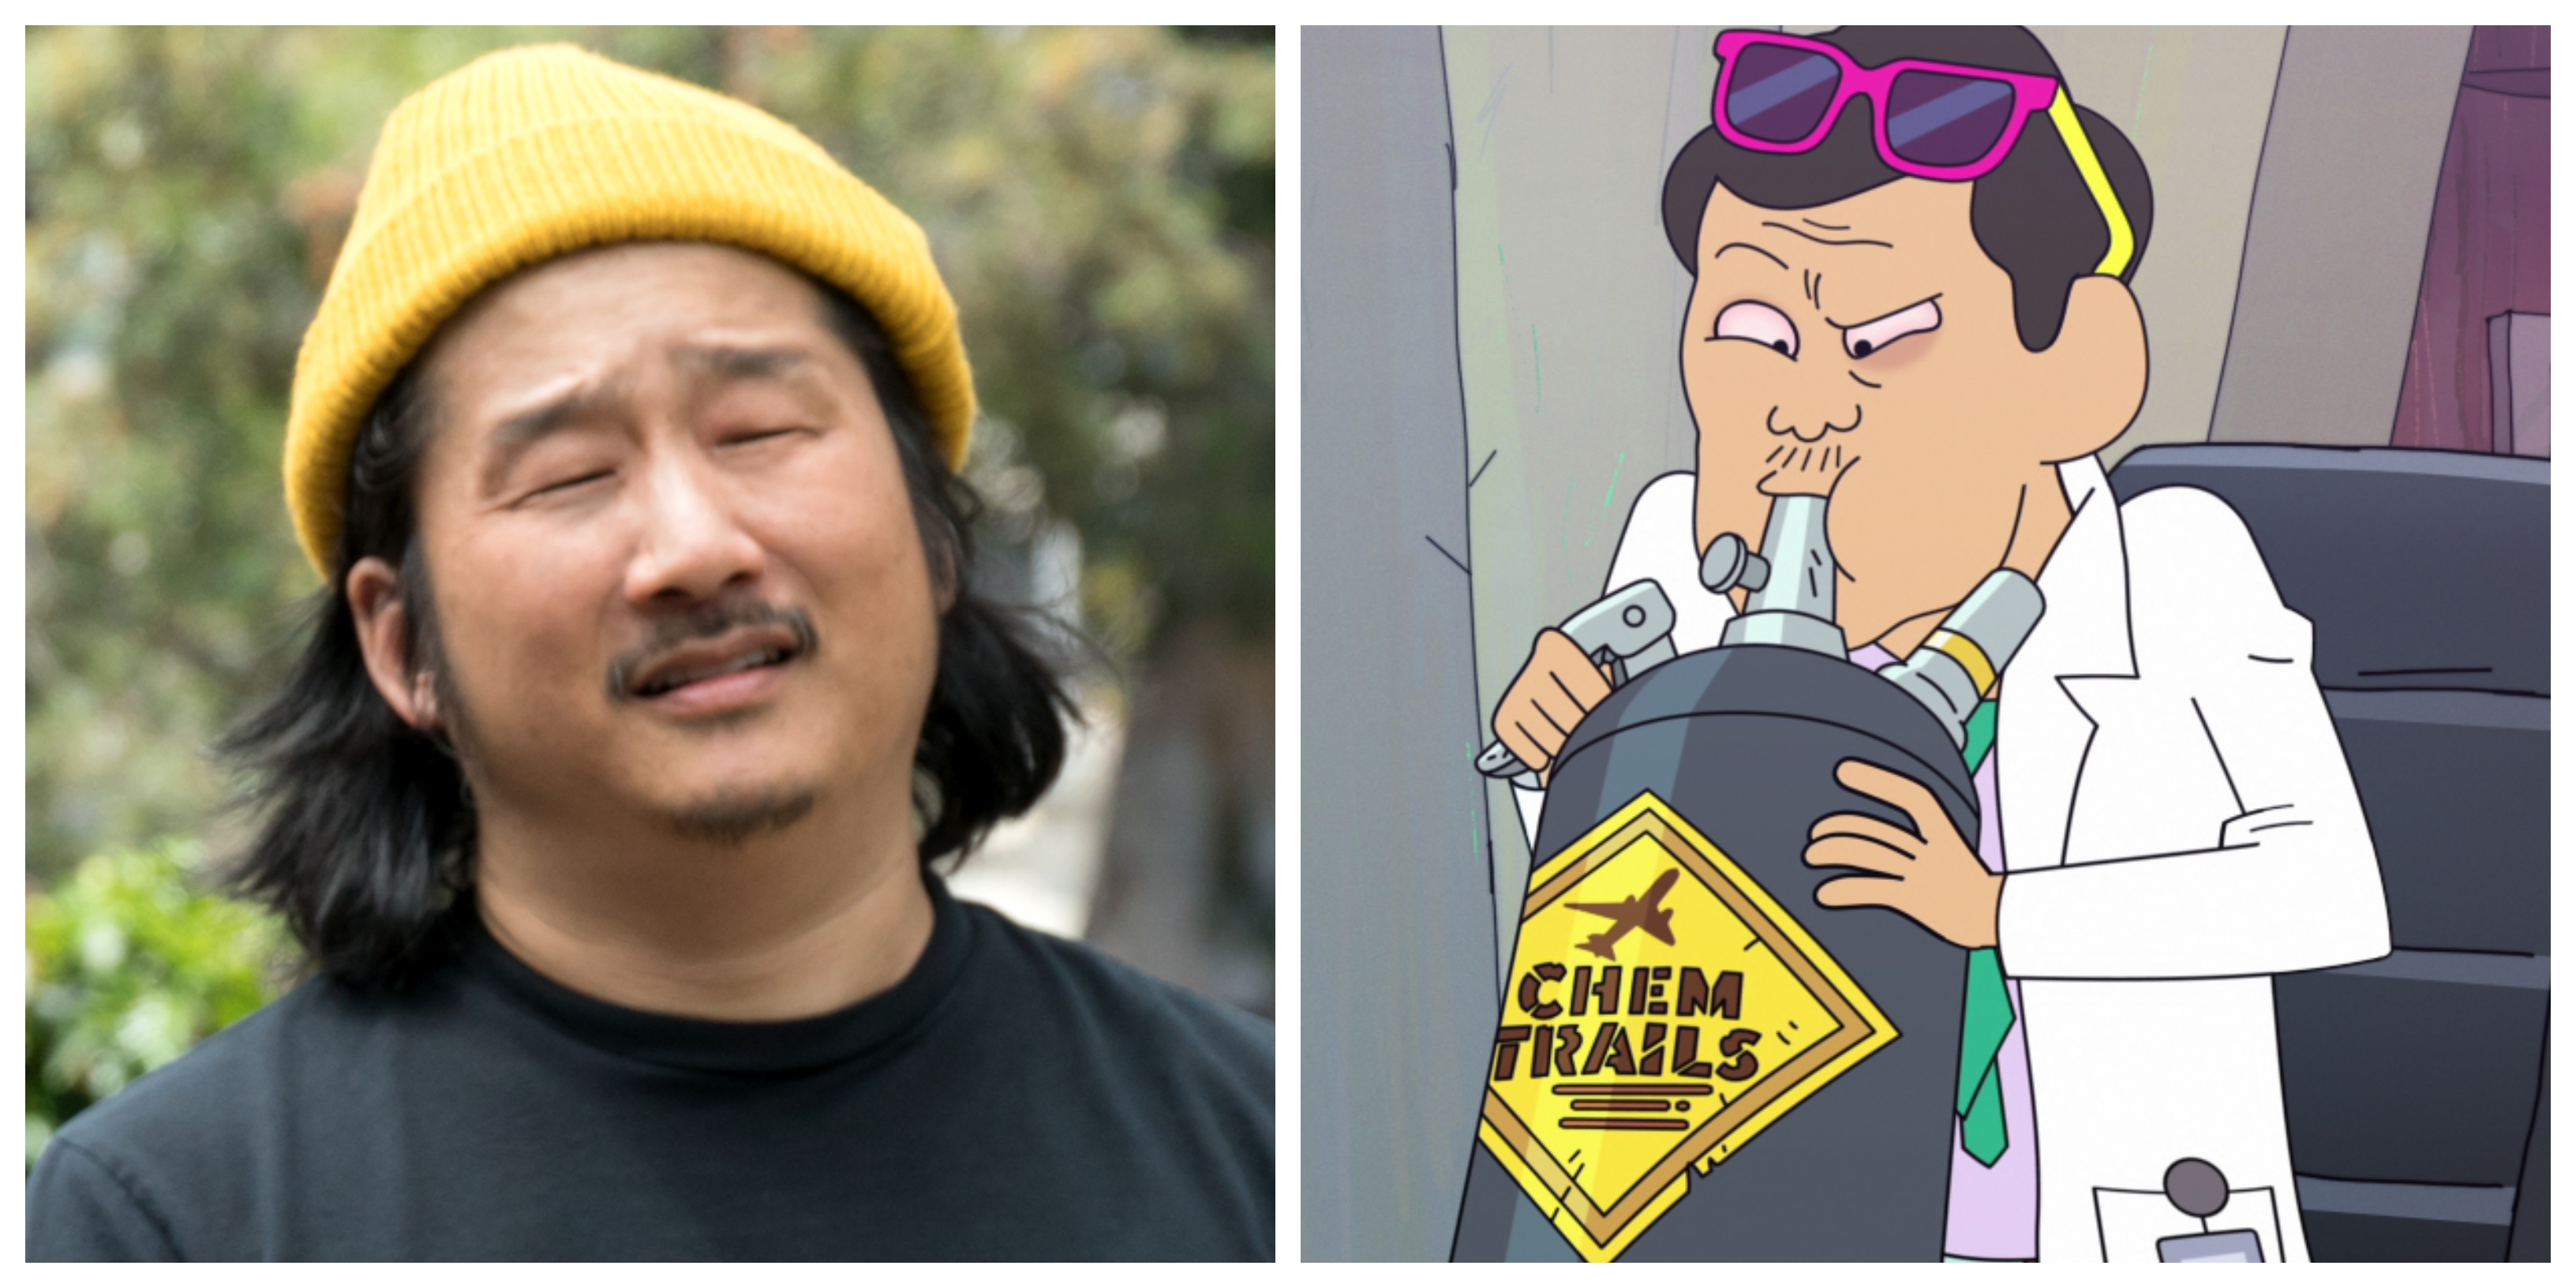 Inside Job Voice Cast on Netflix - Bobby Lee as Dr. Andre